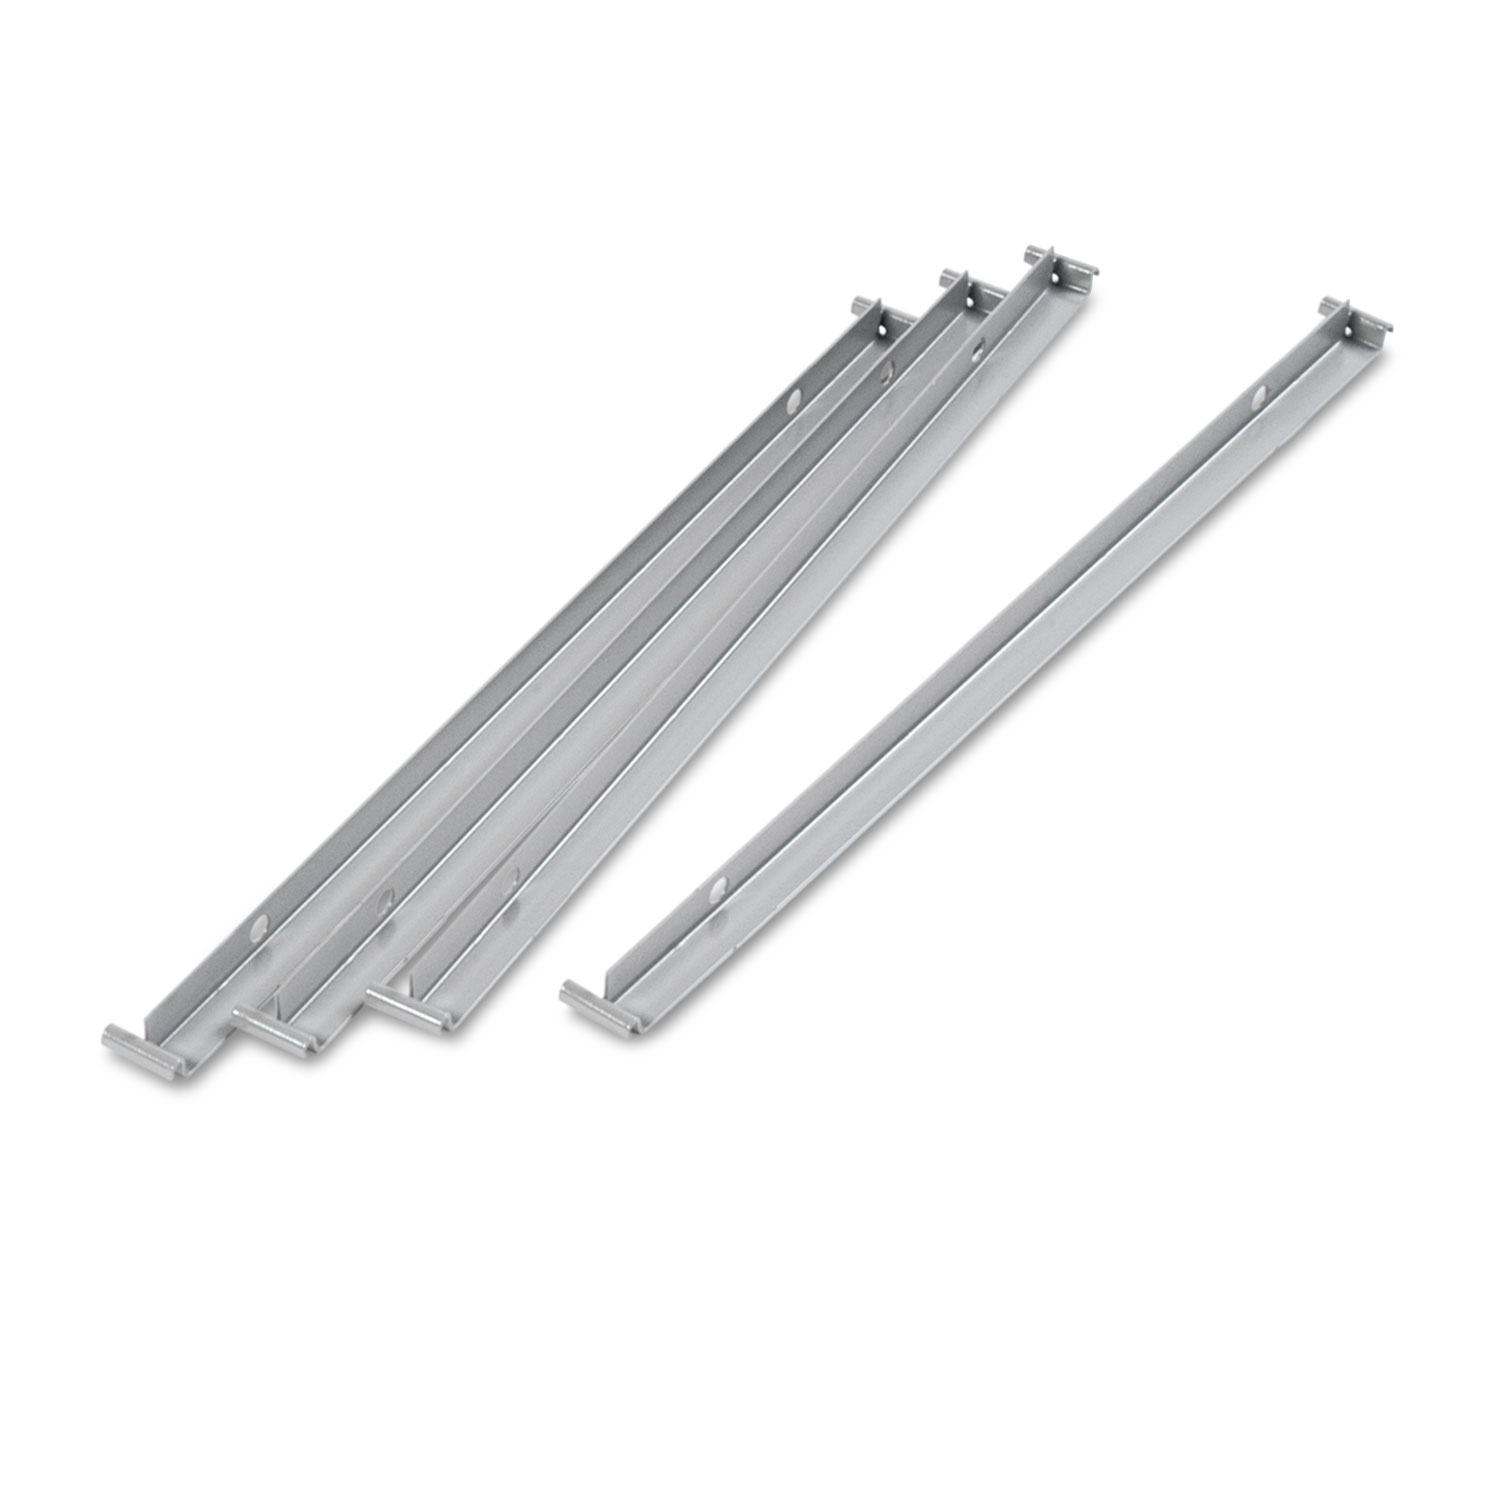 Two Row Hangrails for 30 or 36 Files, Aluminum, 4/Pack